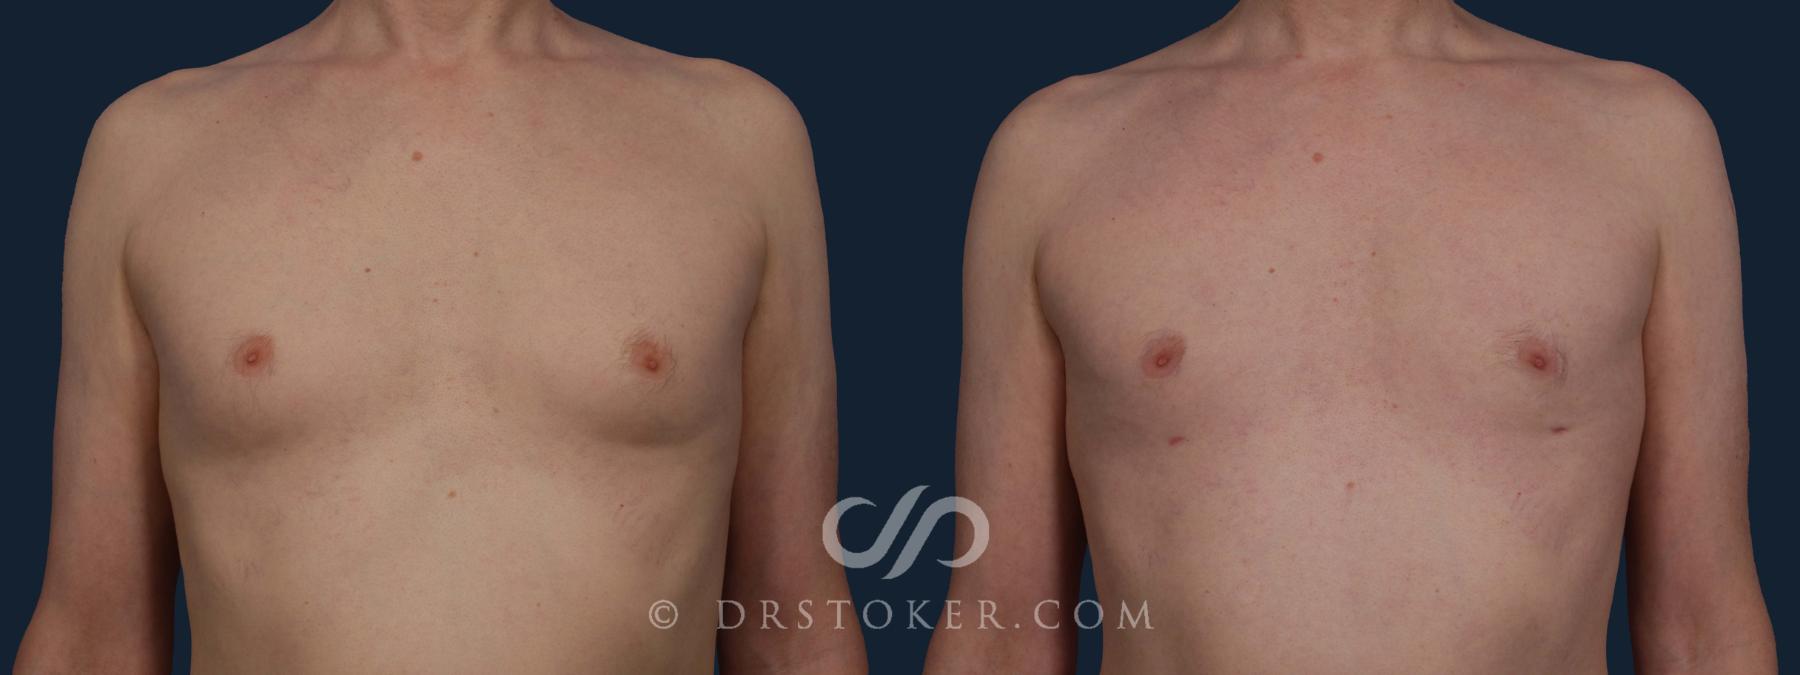 Before & After Breast Reduction for Men (Gynecomastia) Case 1959 Front View in Los Angeles, CA